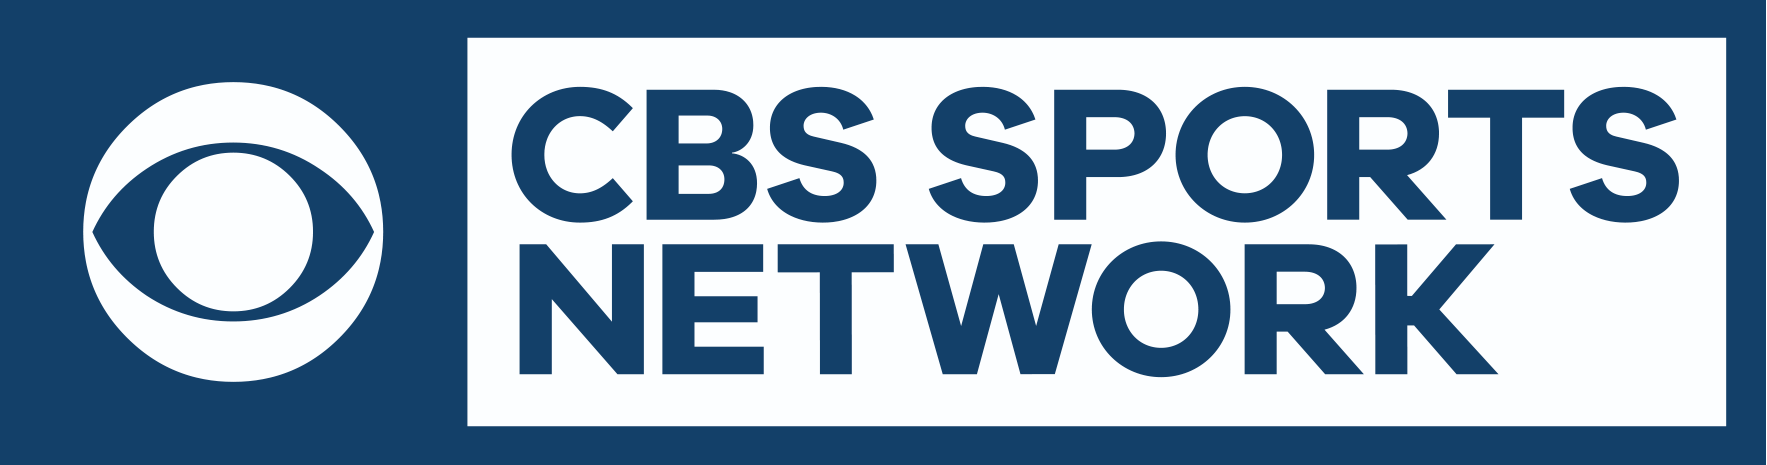 Paramount Press Express CBS SPORTS NETWORK TEES UP 2017 MASTERS® WITH WEEK-LONG COVERAGE SURROUNDING CBS SPORTS LIVE BROADCASTS